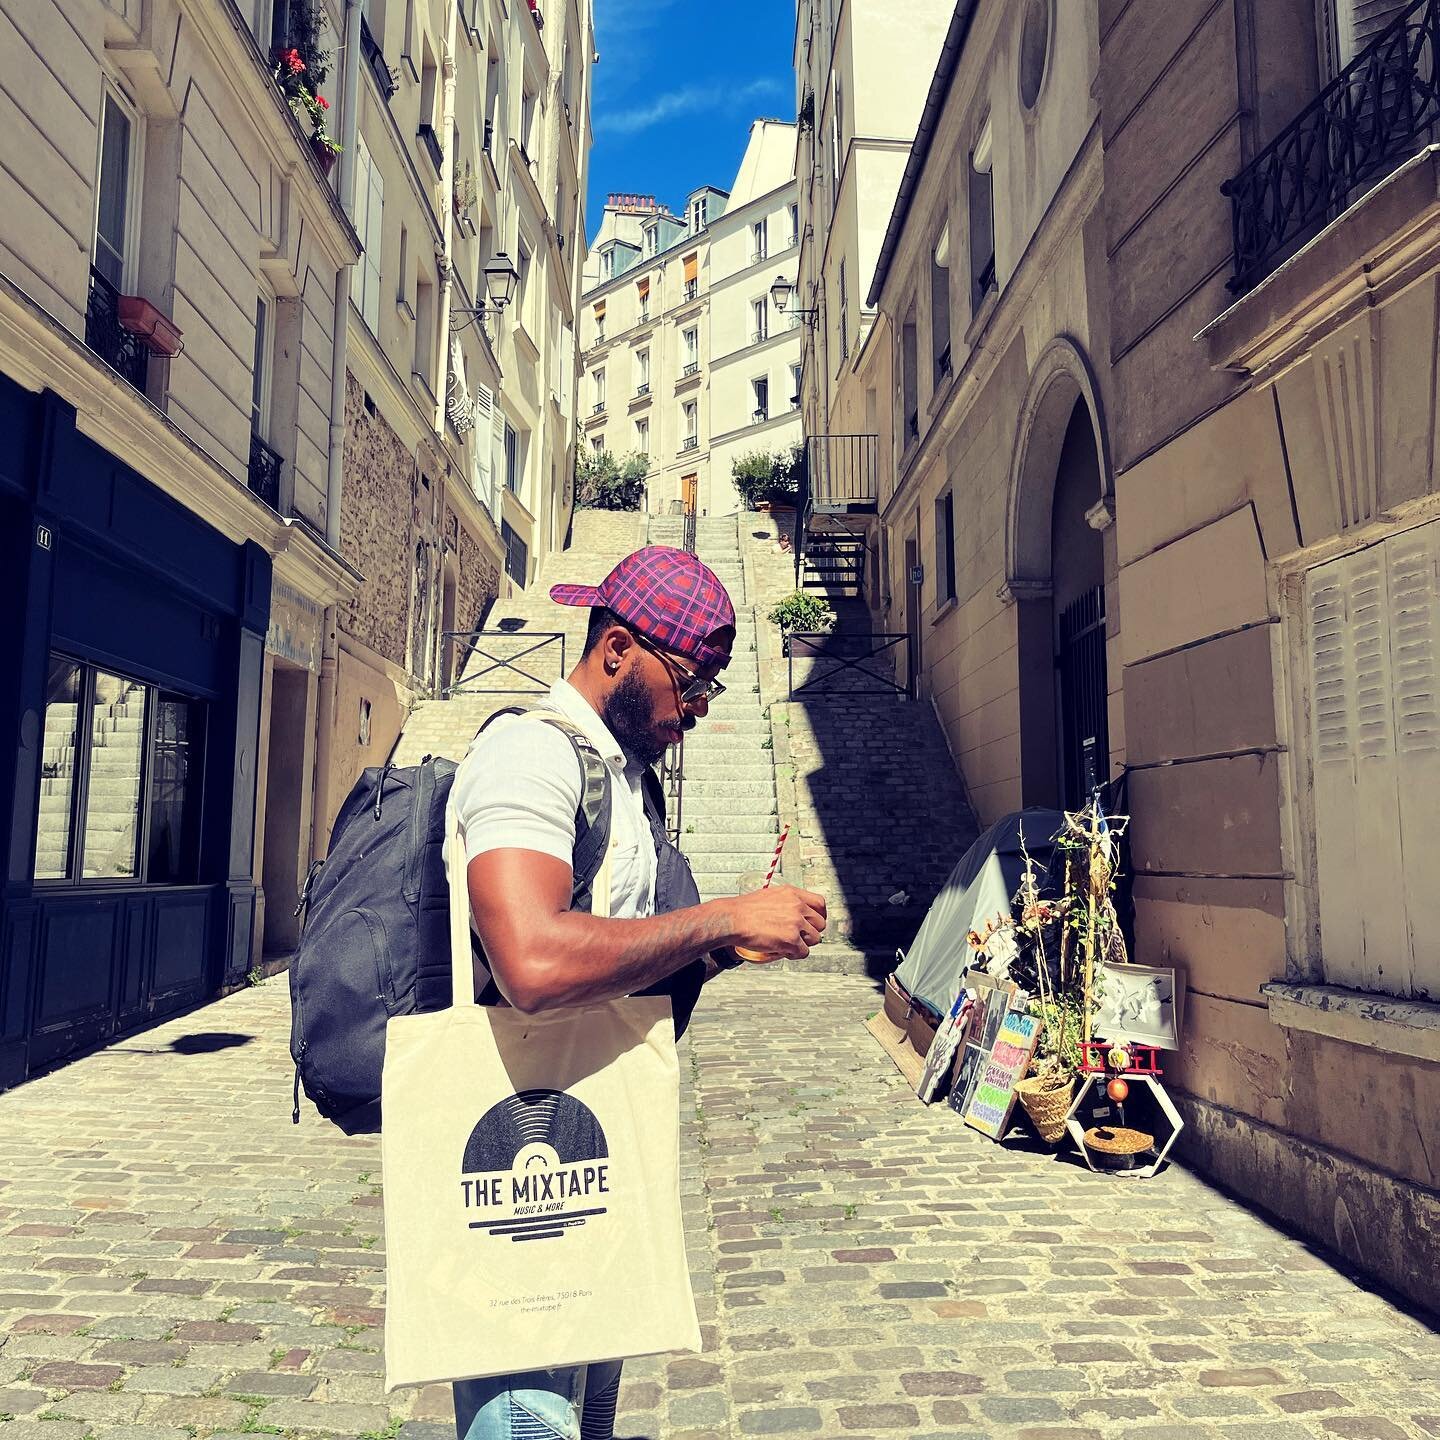 2022 &bull; Live in Paris with Mojo: Walking in the streets of Paris for a couple of days has thoroughly inspired me. From touring historic museums featuring timeless artists to eating crepes paired with Mojitos, I feel undeniably connected to this c